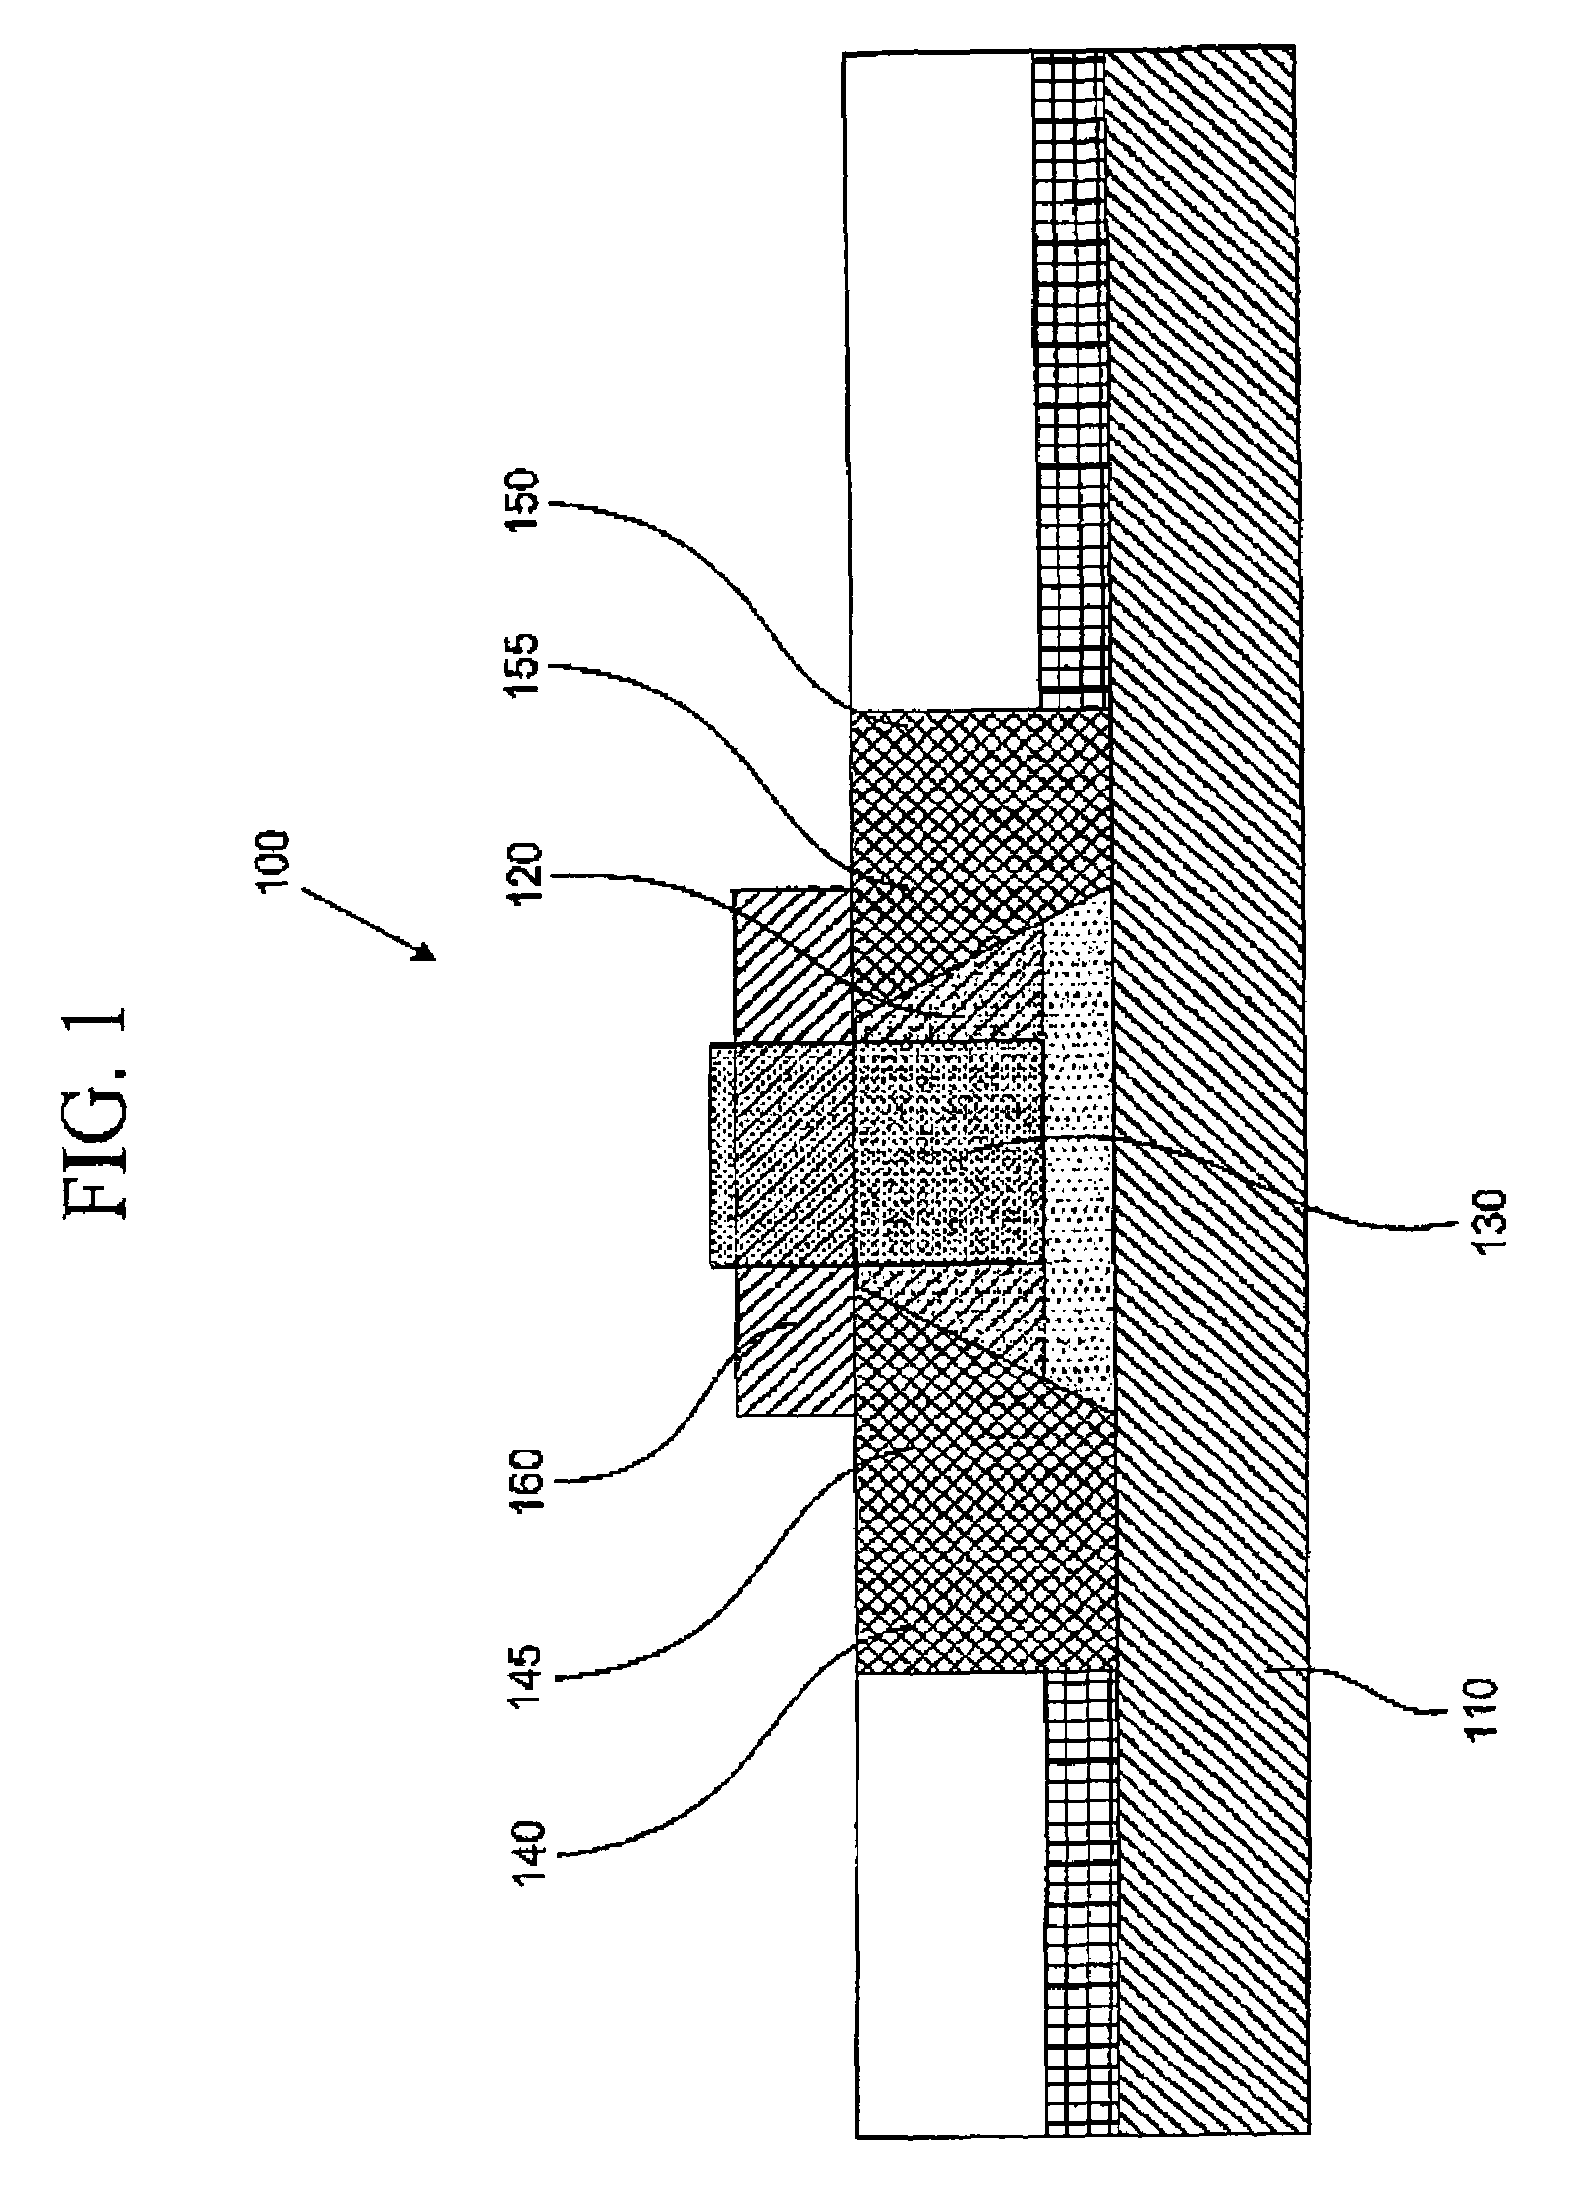 Dual-plane complementary metal oxide semiconductor